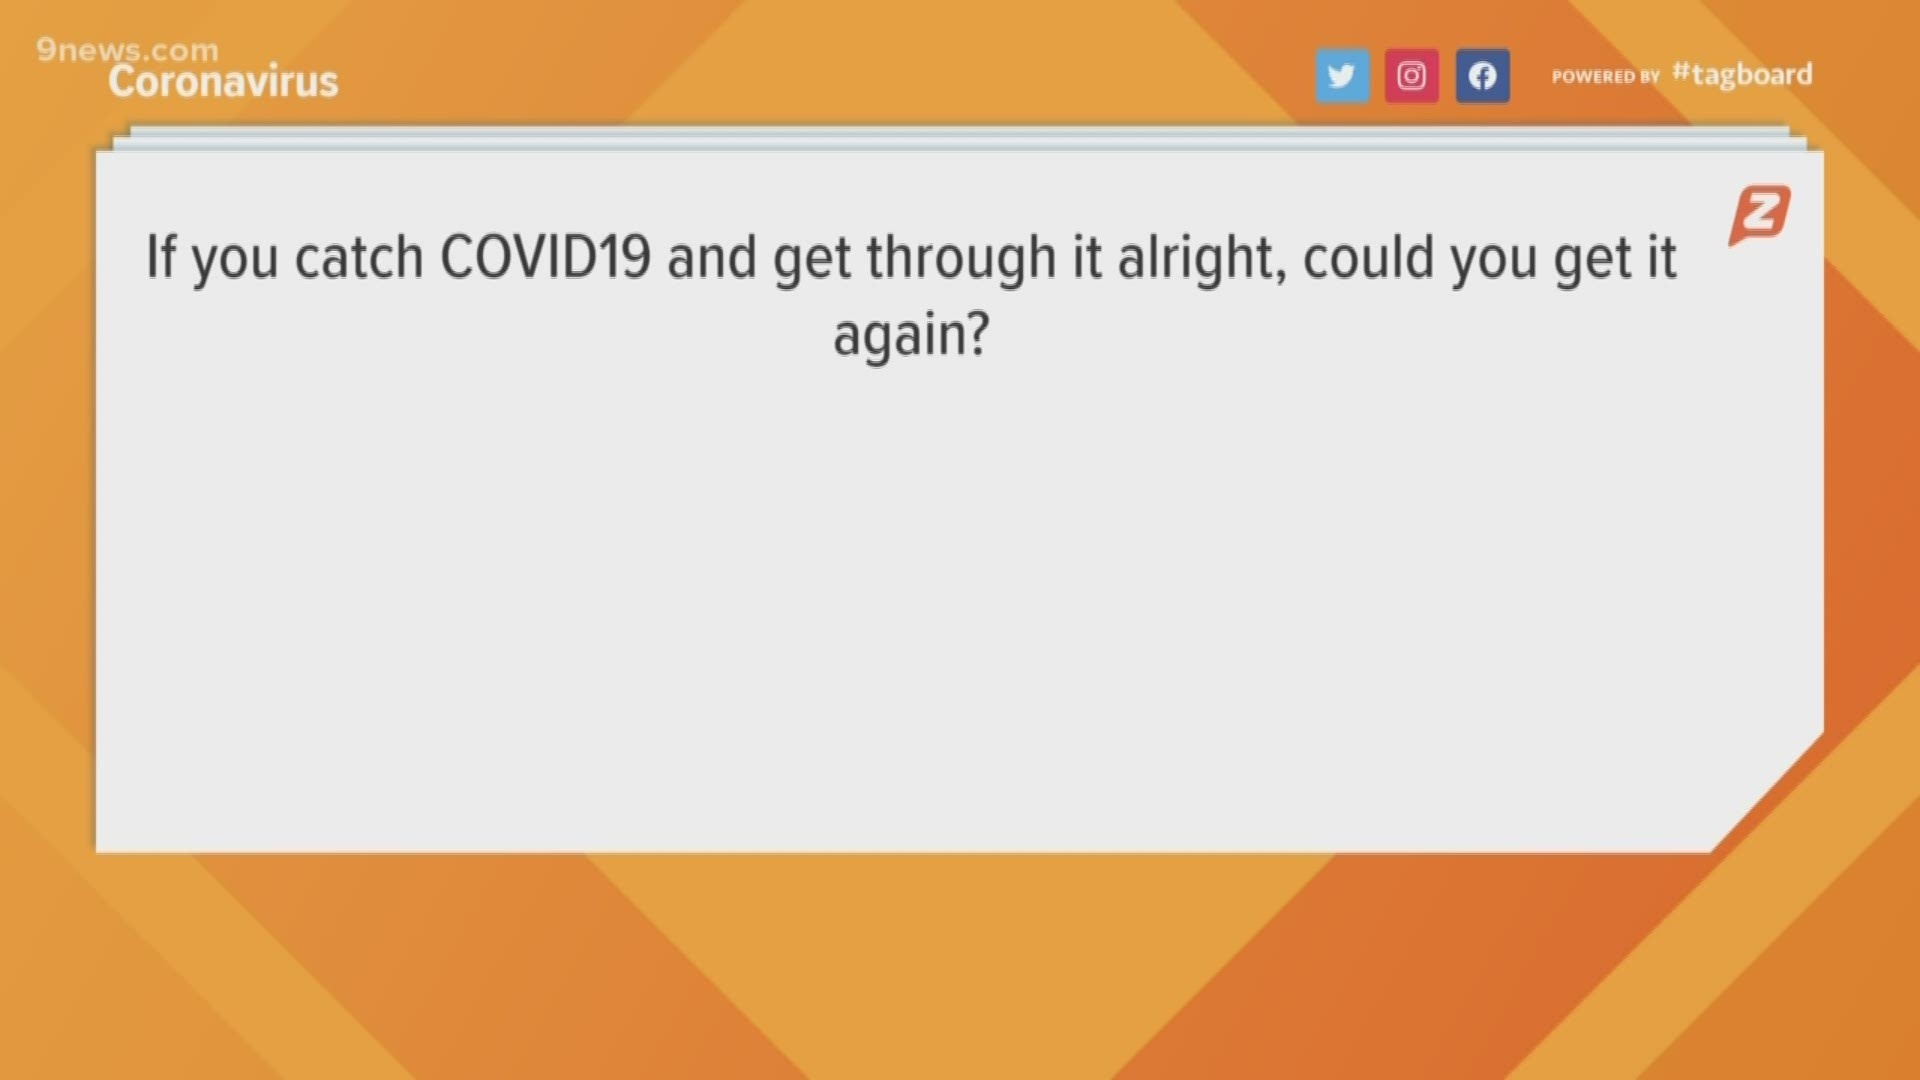 From treatments to potential immunity after getting COVID-19. Dr. Kohli answers your questions on the new strain of the virus that's having a major impact.